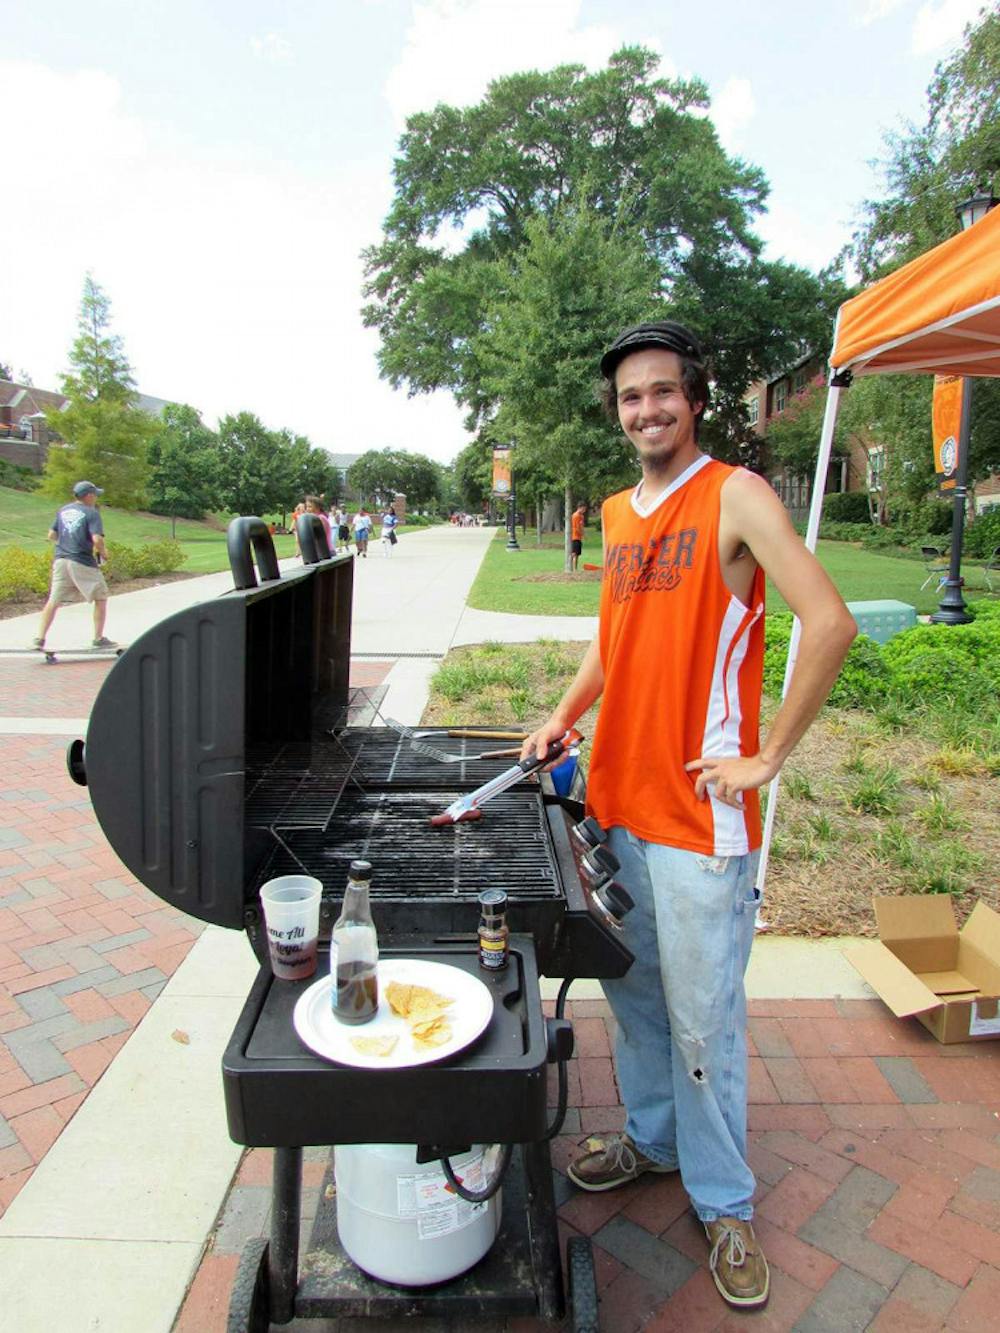 Preferring to be called "Bear Grills," this student is a legend for not only his shirt, but also for his renowned devotion to his tailgate.